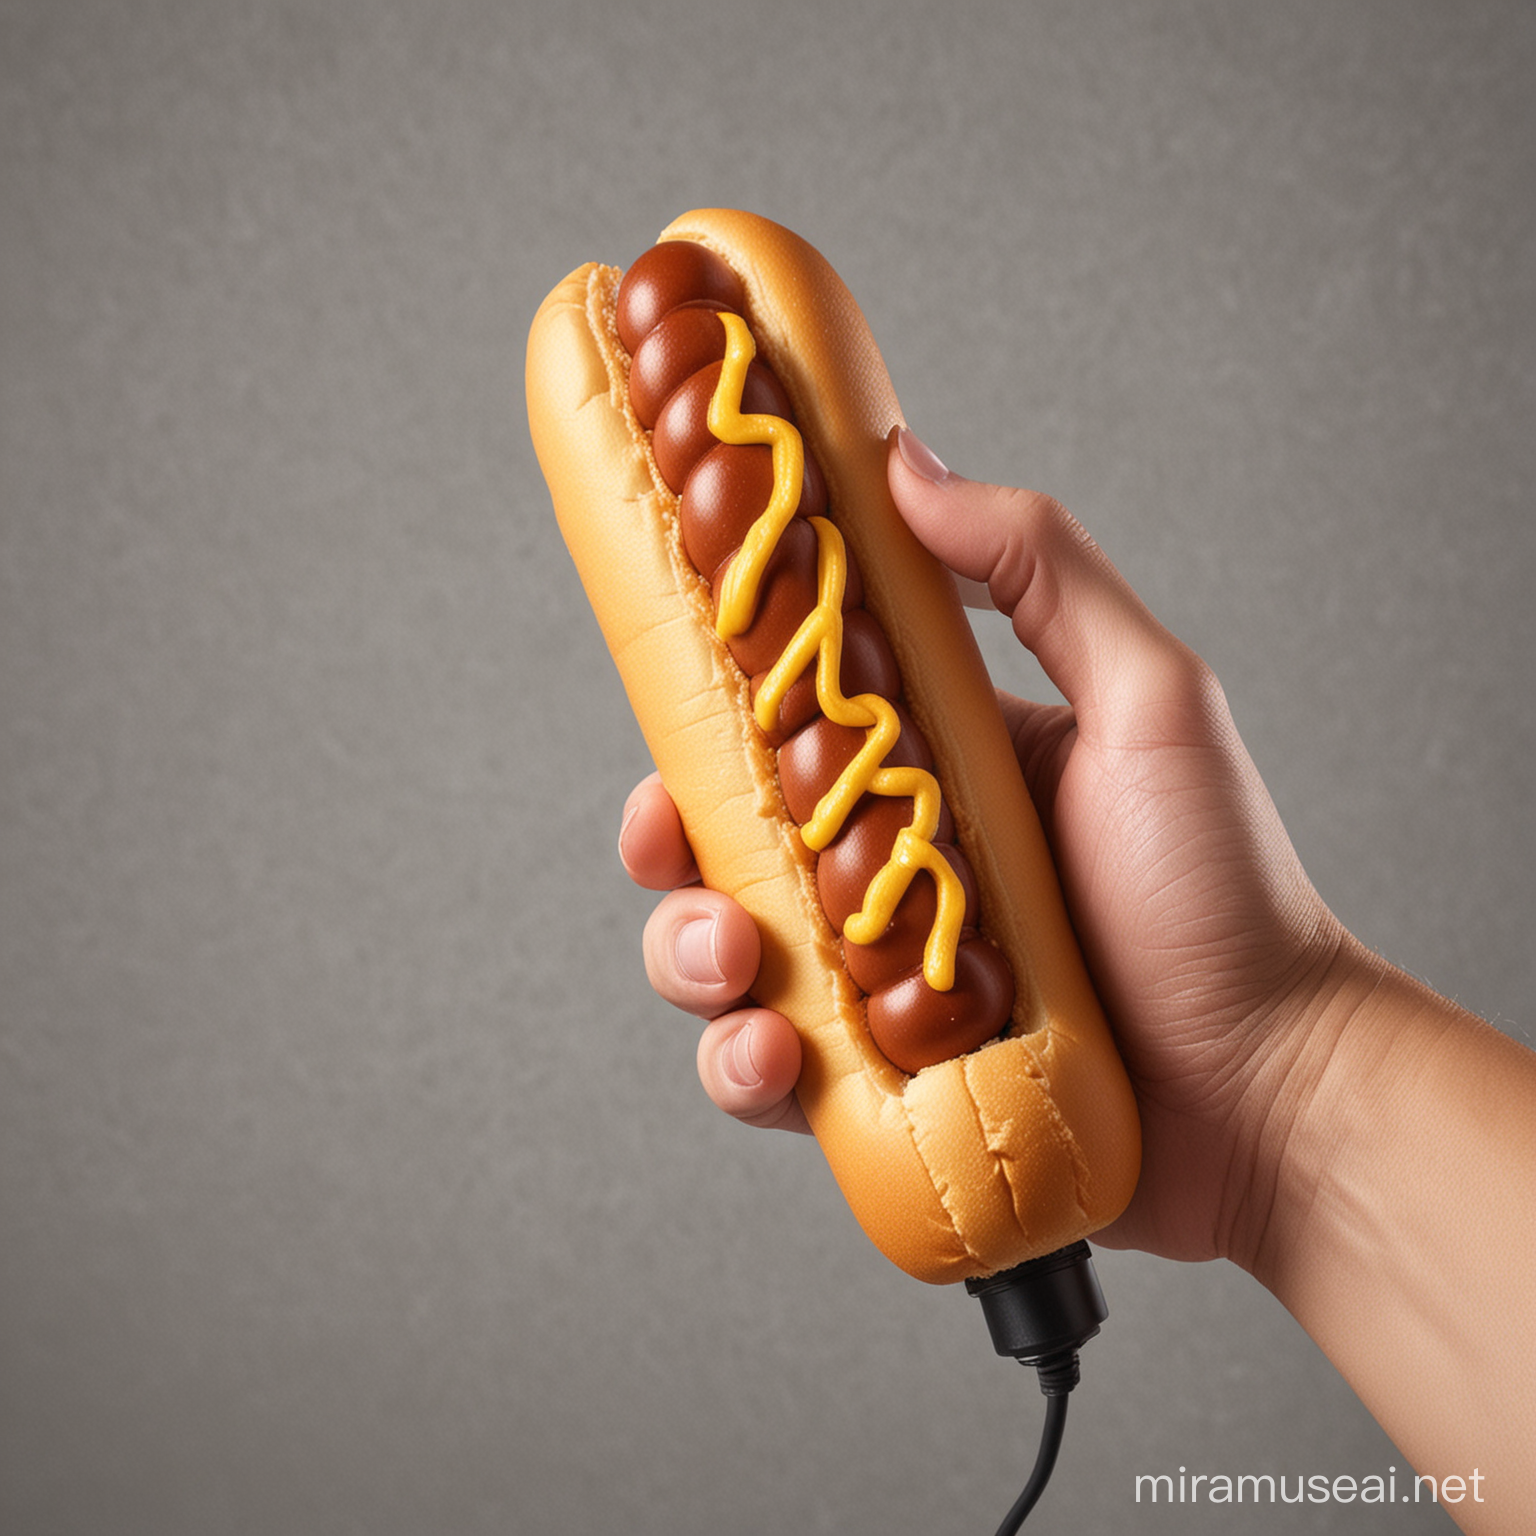 A hand held microphone that is shaped like a hot dog